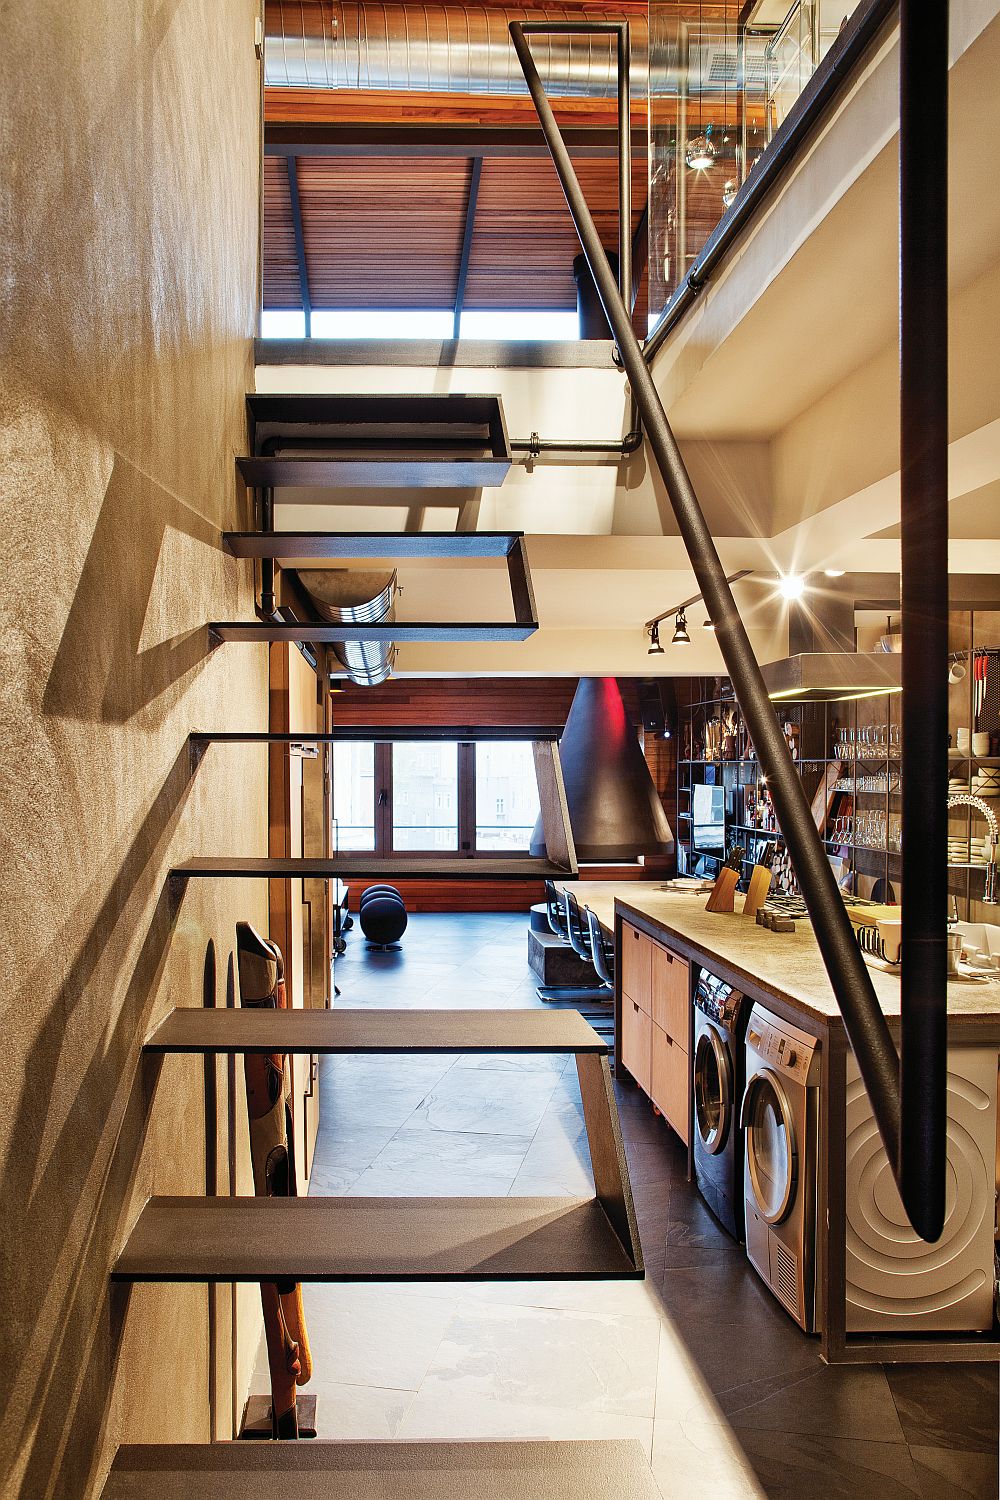 Creative staircase design for the urban industrial style loft